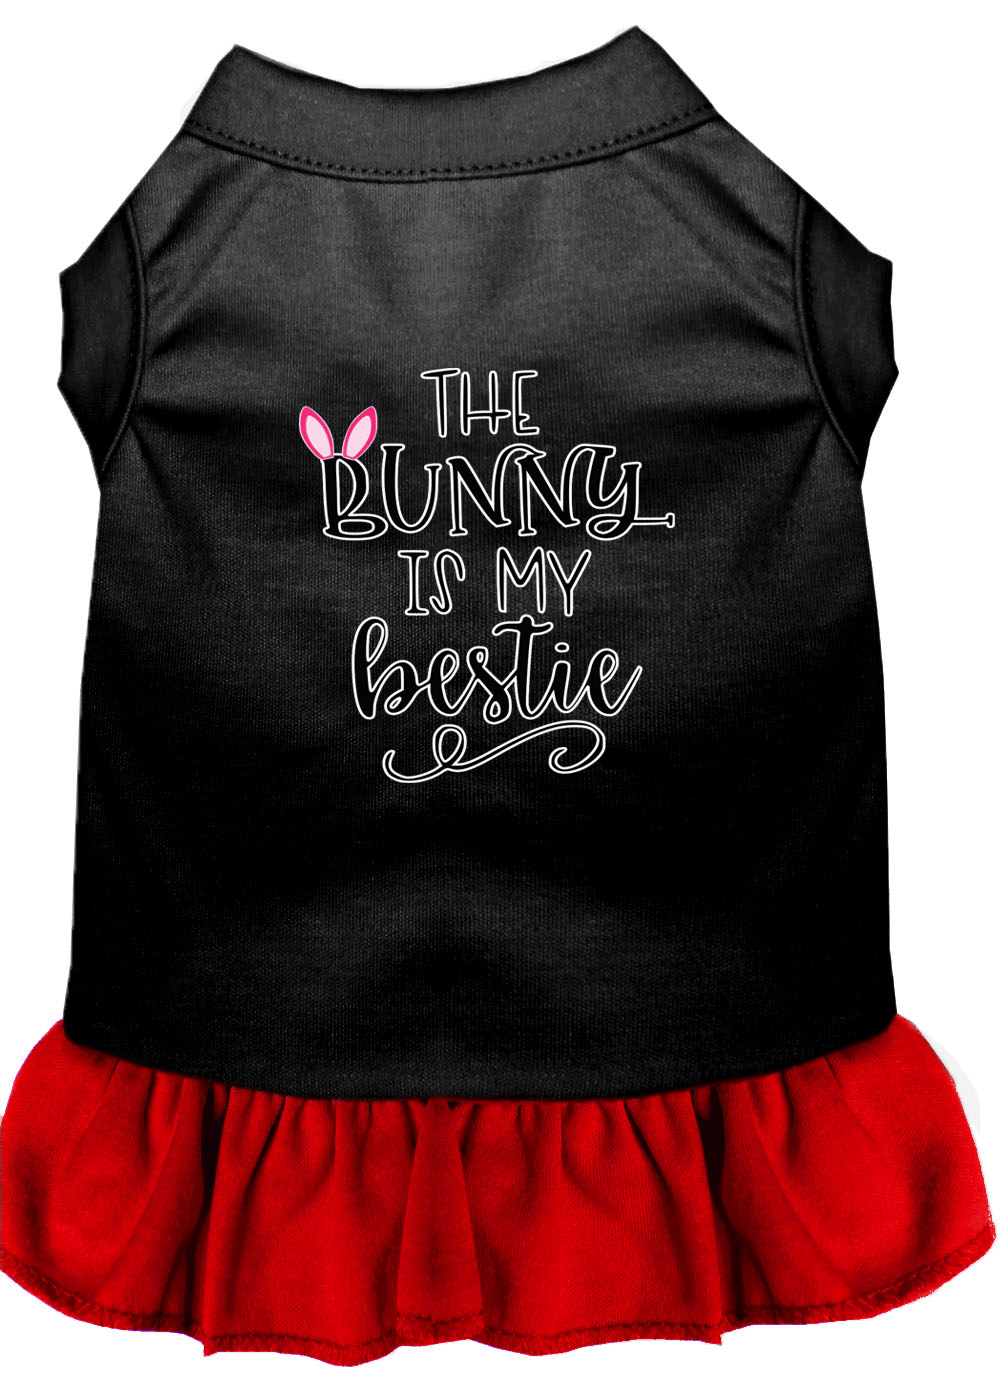 Bunny is my Bestie Screen Print Dog Dress Black with Red Med